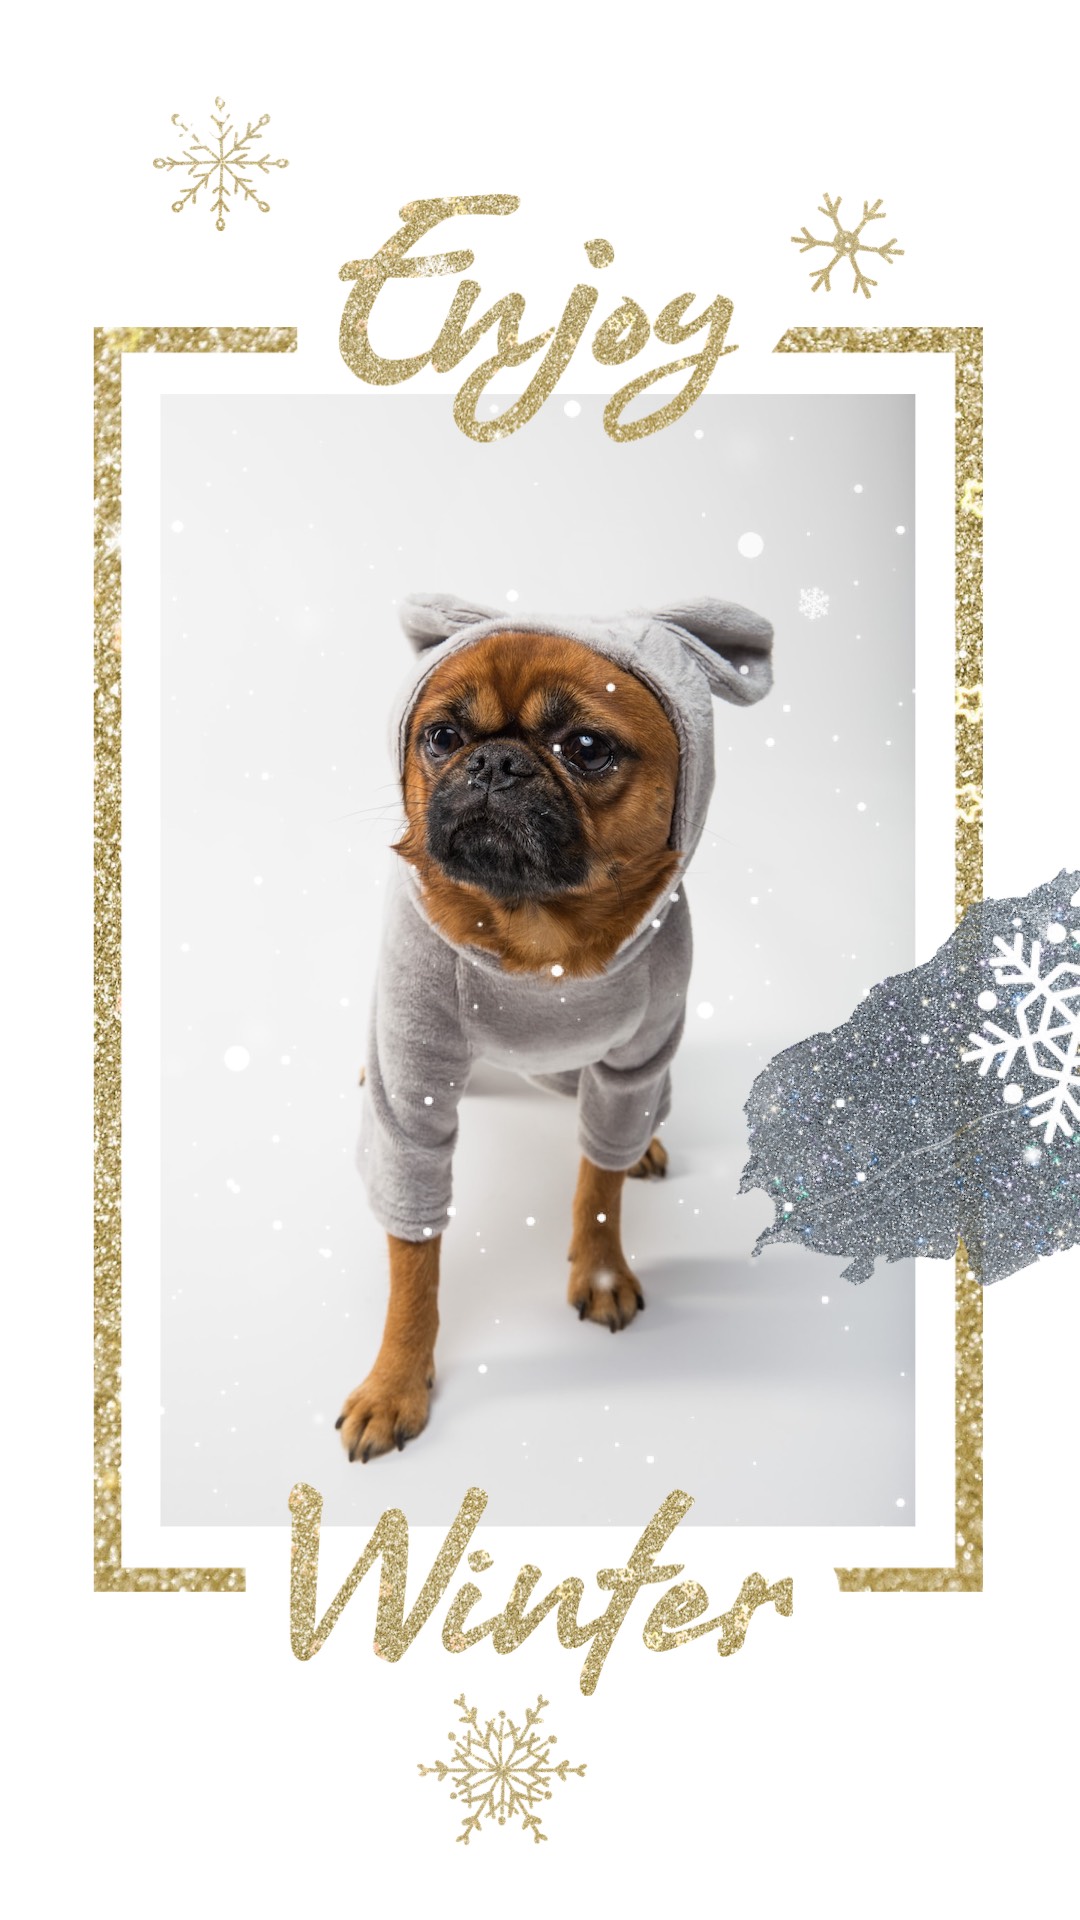 Dog wearing a wanzi with snowflakes enjoy winter Story template